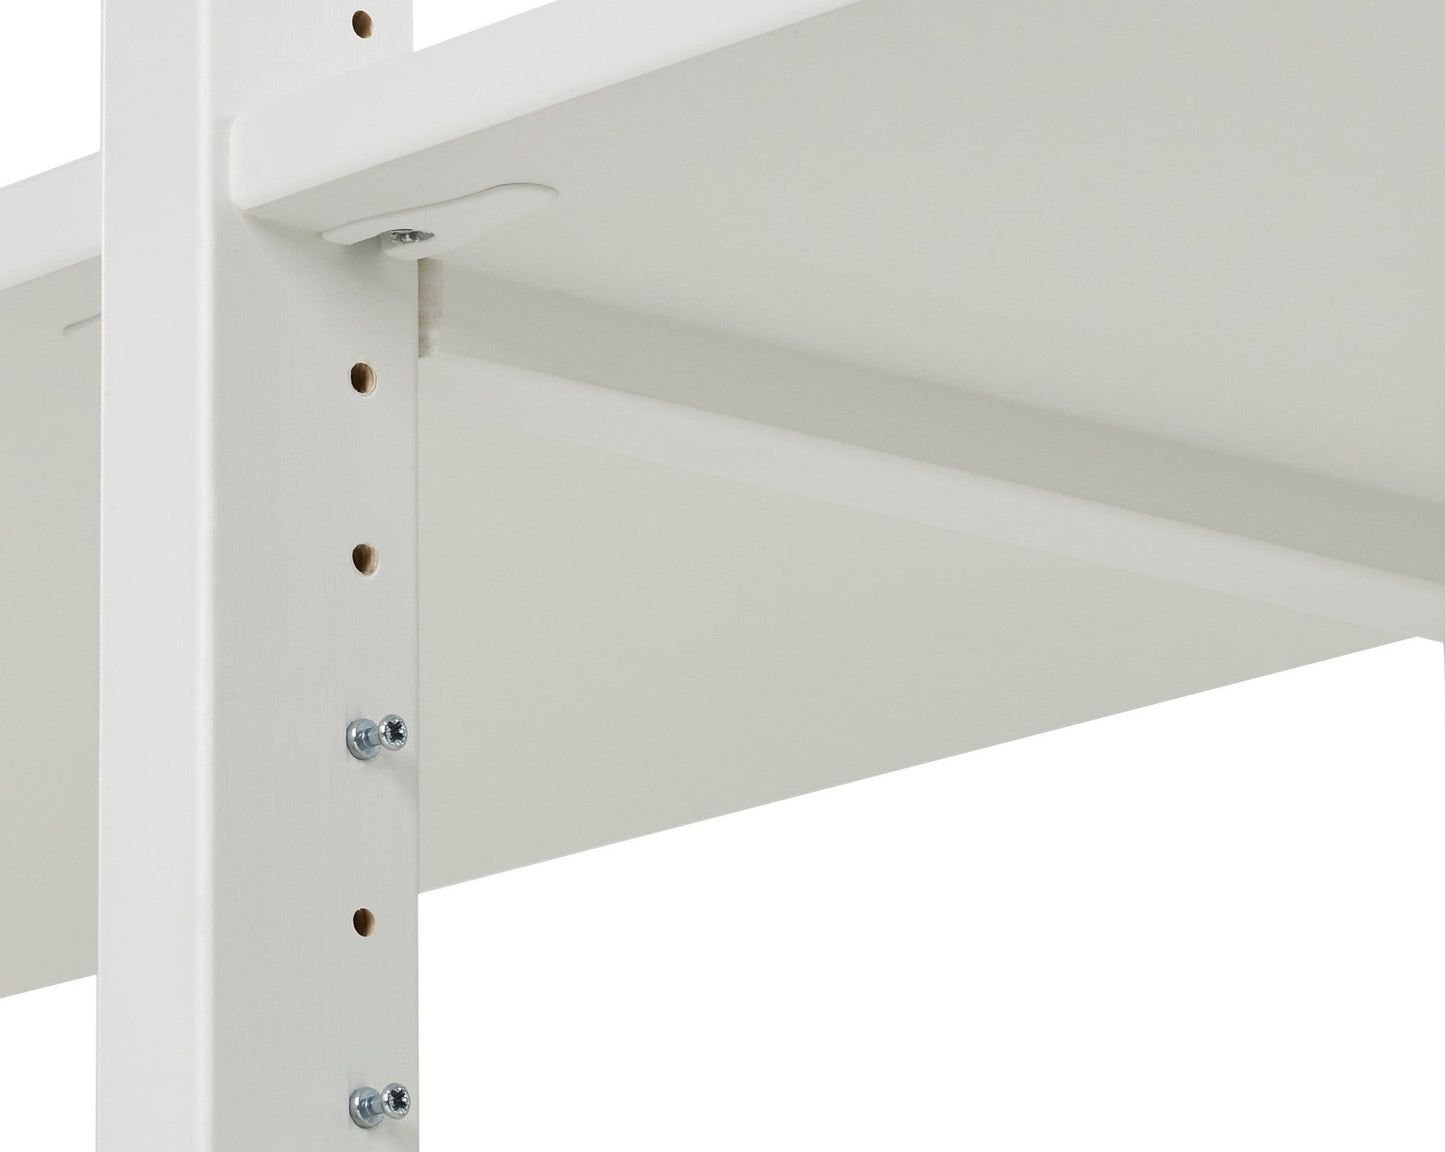 Storey - Half section with 4 shelves - 100 cm - White